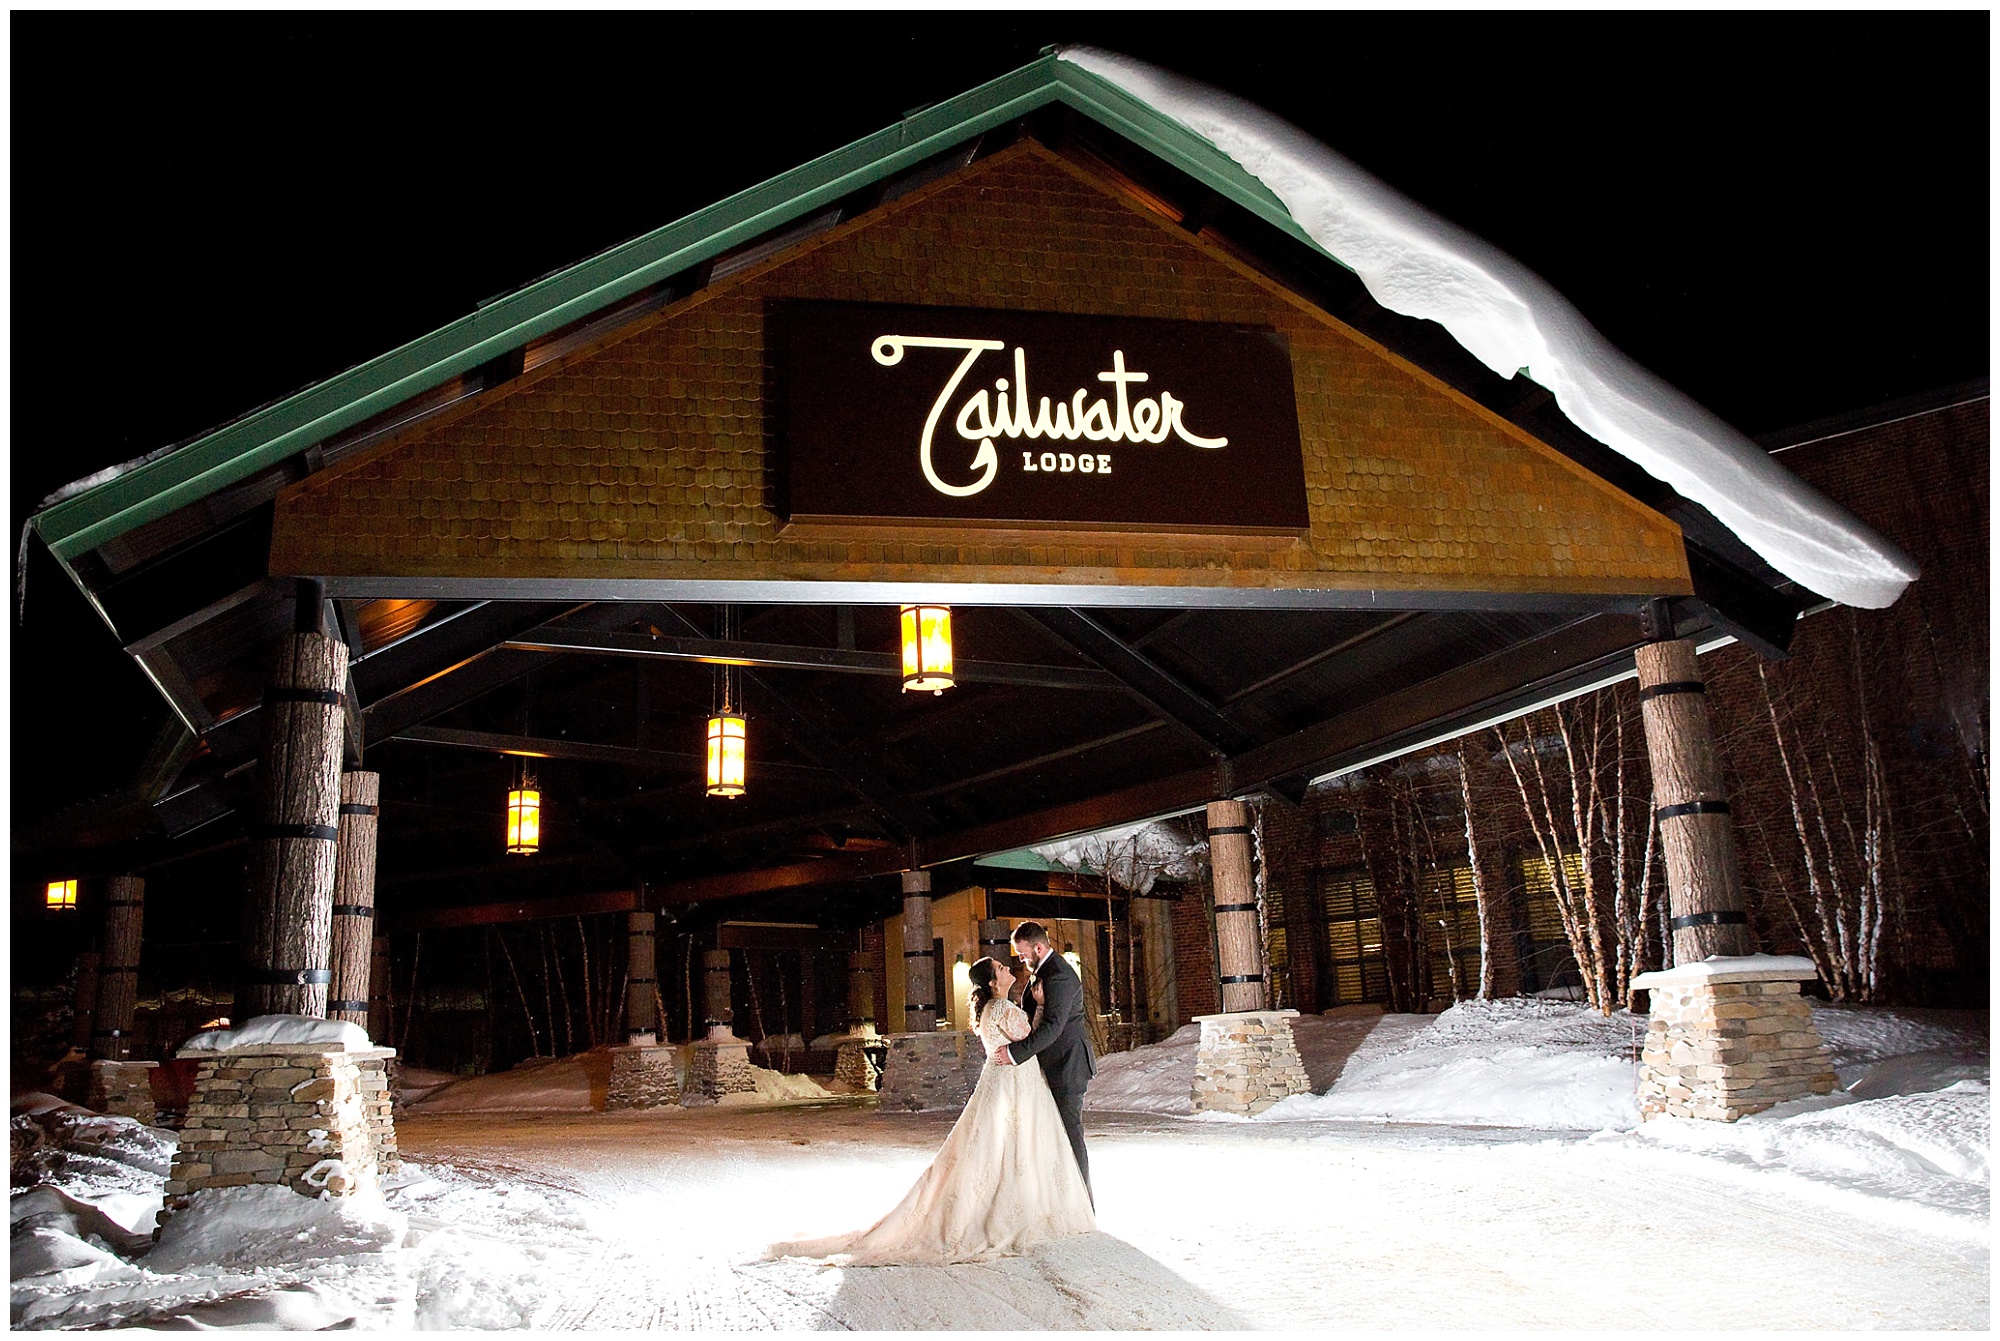 Photo of a bride and grrom in an embrace outside the Tailwater Lodge (Altmar, NY) entrance during a winter setting, 